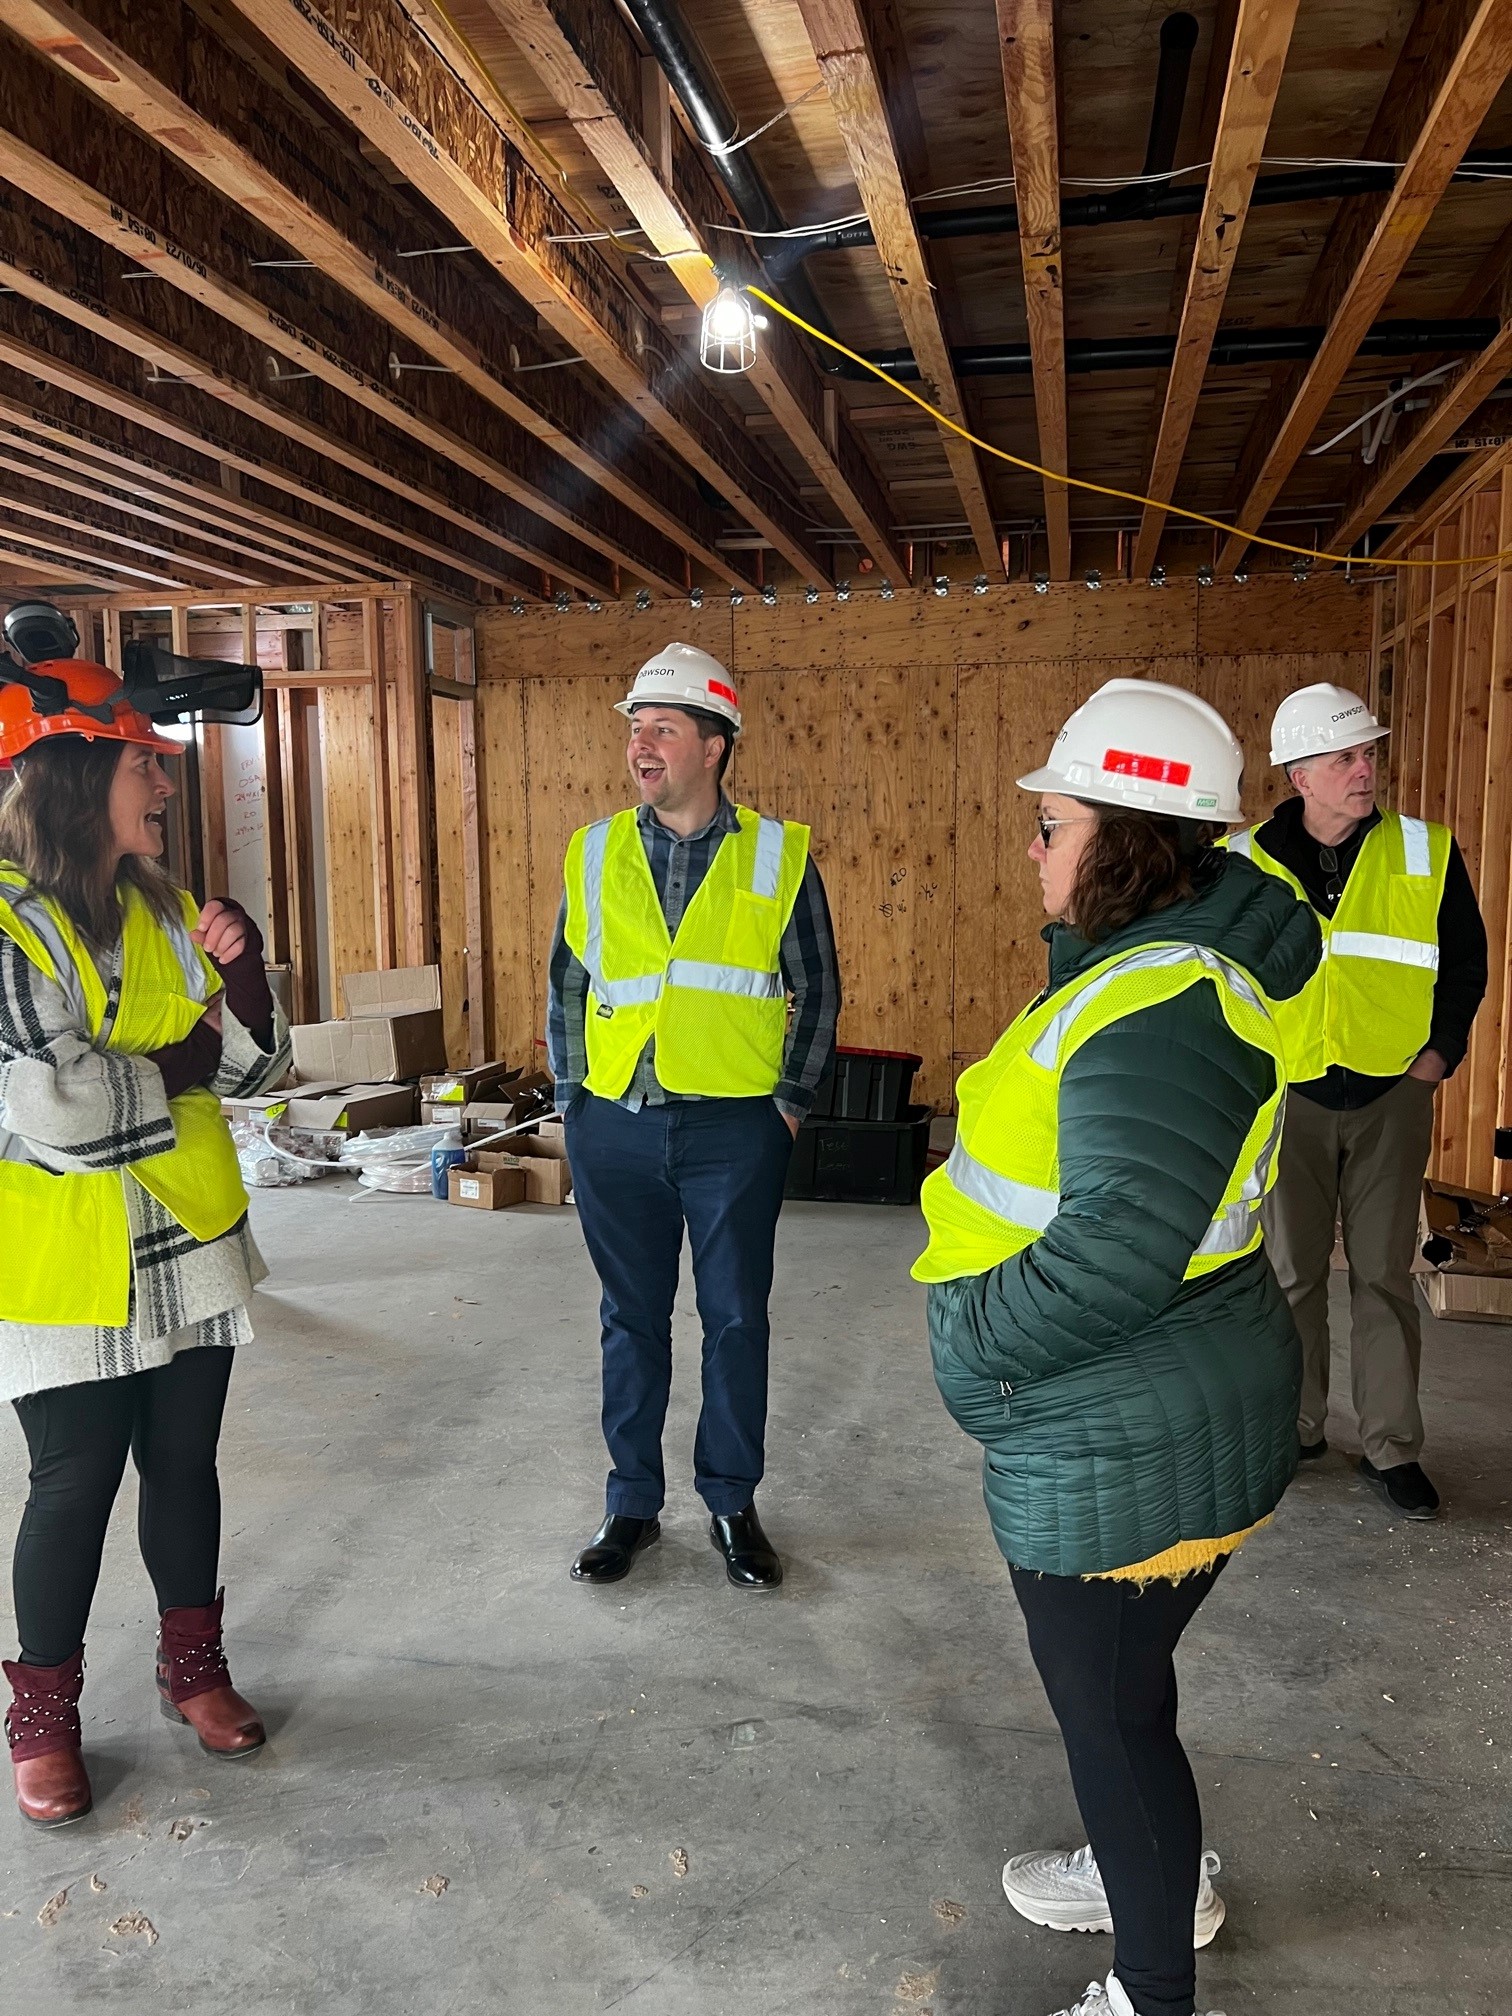 Four people in reflective vests and hard hats stand in a building that is under construction with wood beams on the ceiling and plywood walls.